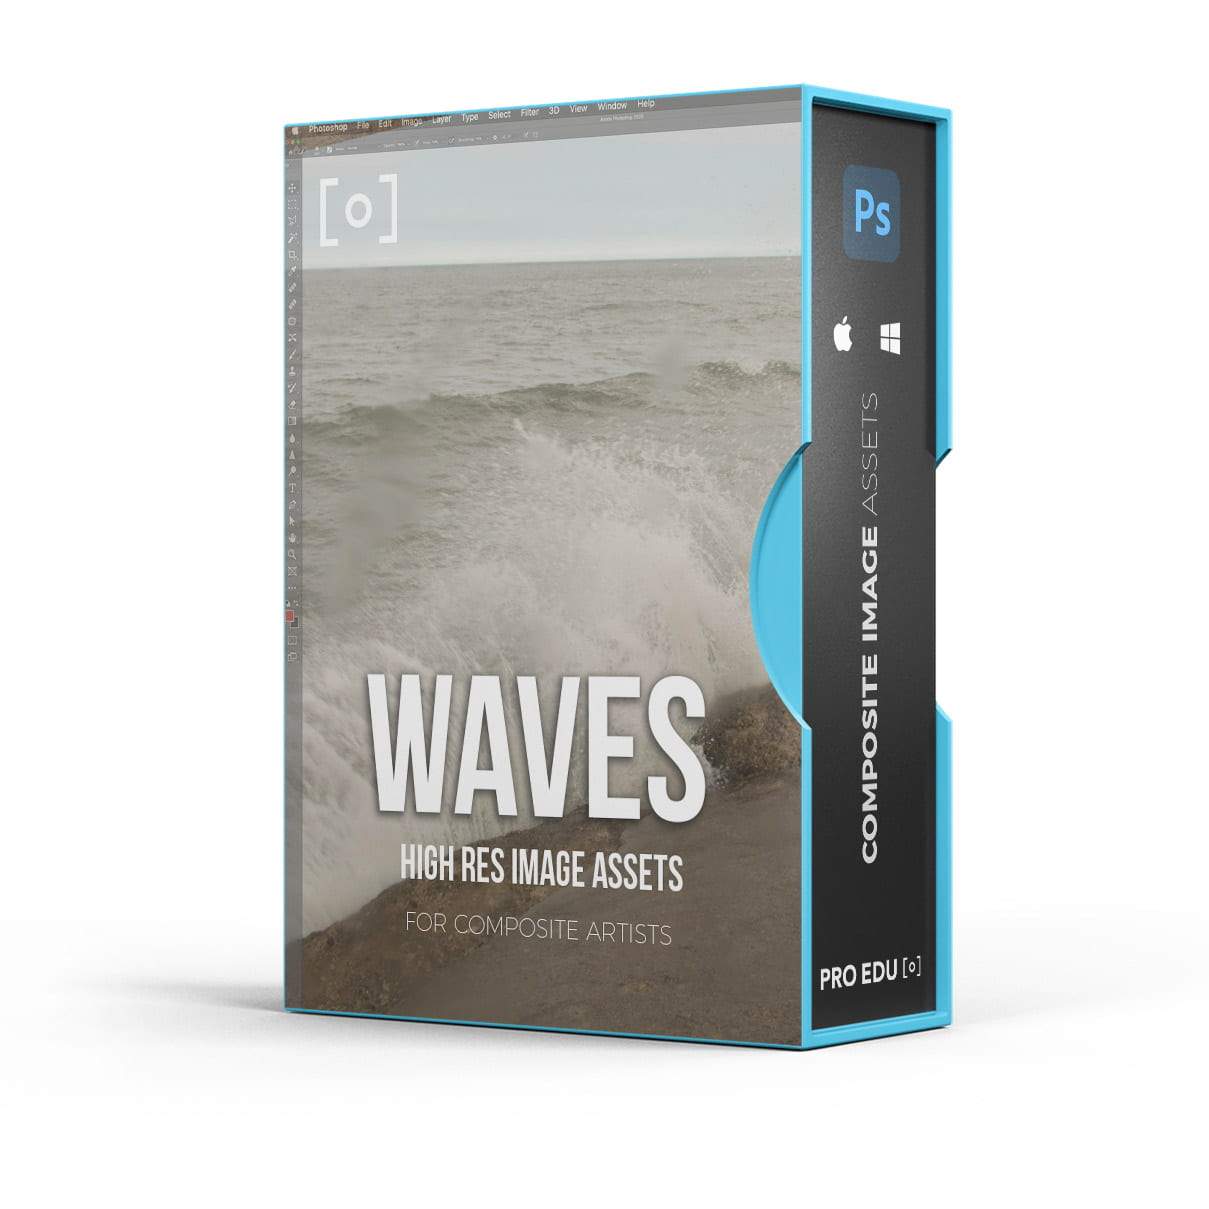 Composite Stock Asset Seas And Waves Photoshop Assets Stock PRO EDU PRO EDU PRO EDU